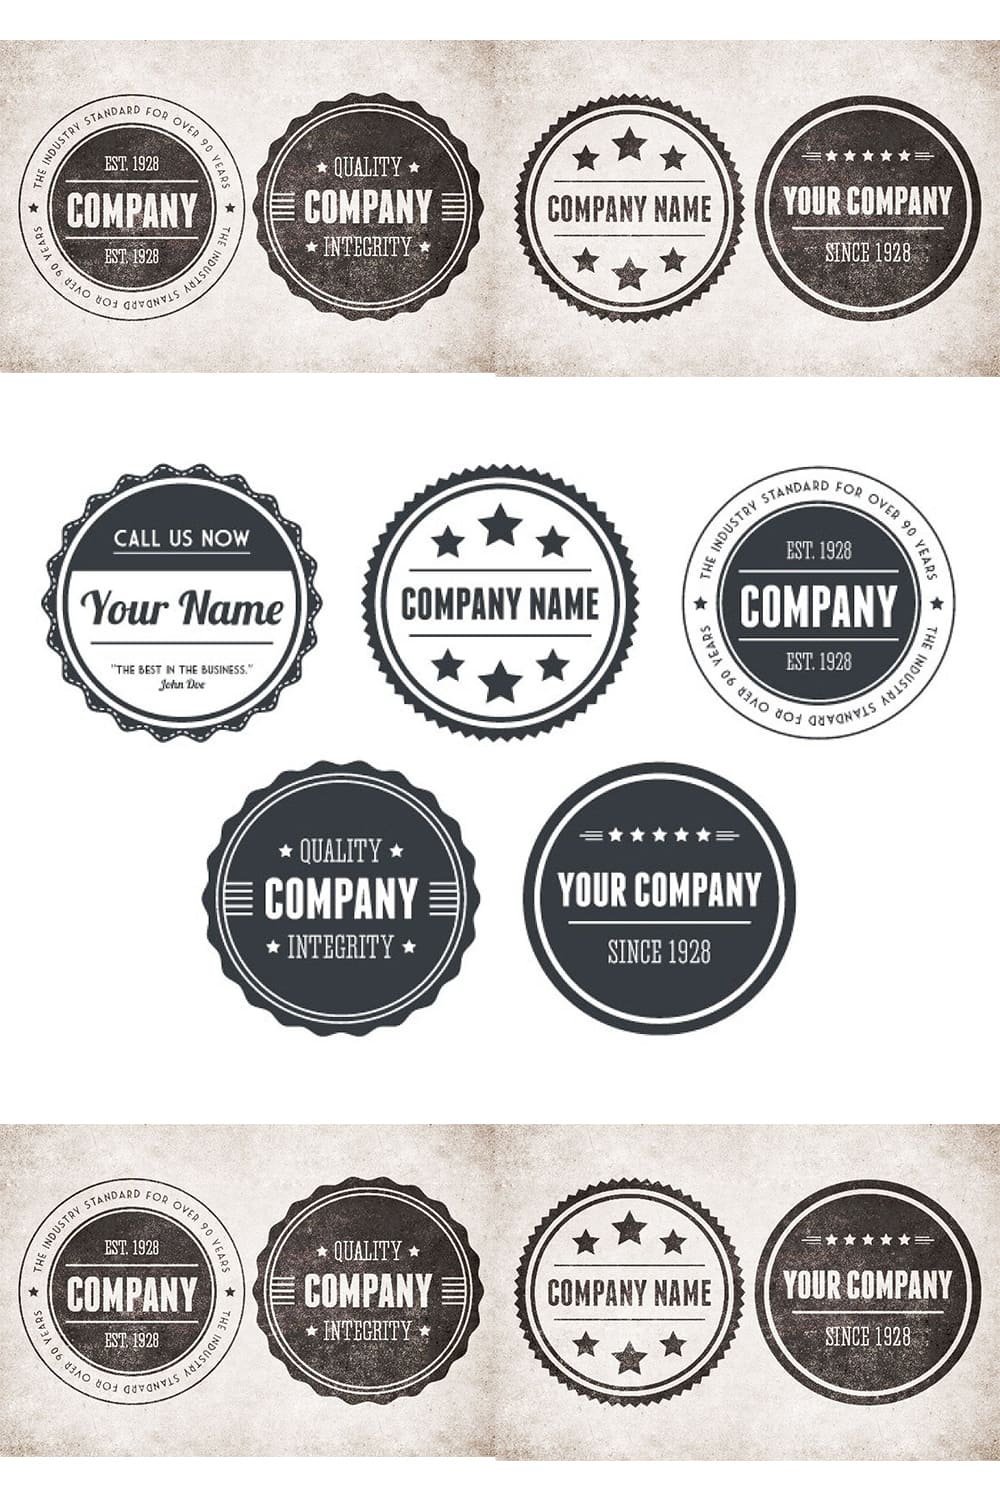 Logos in different circle types.